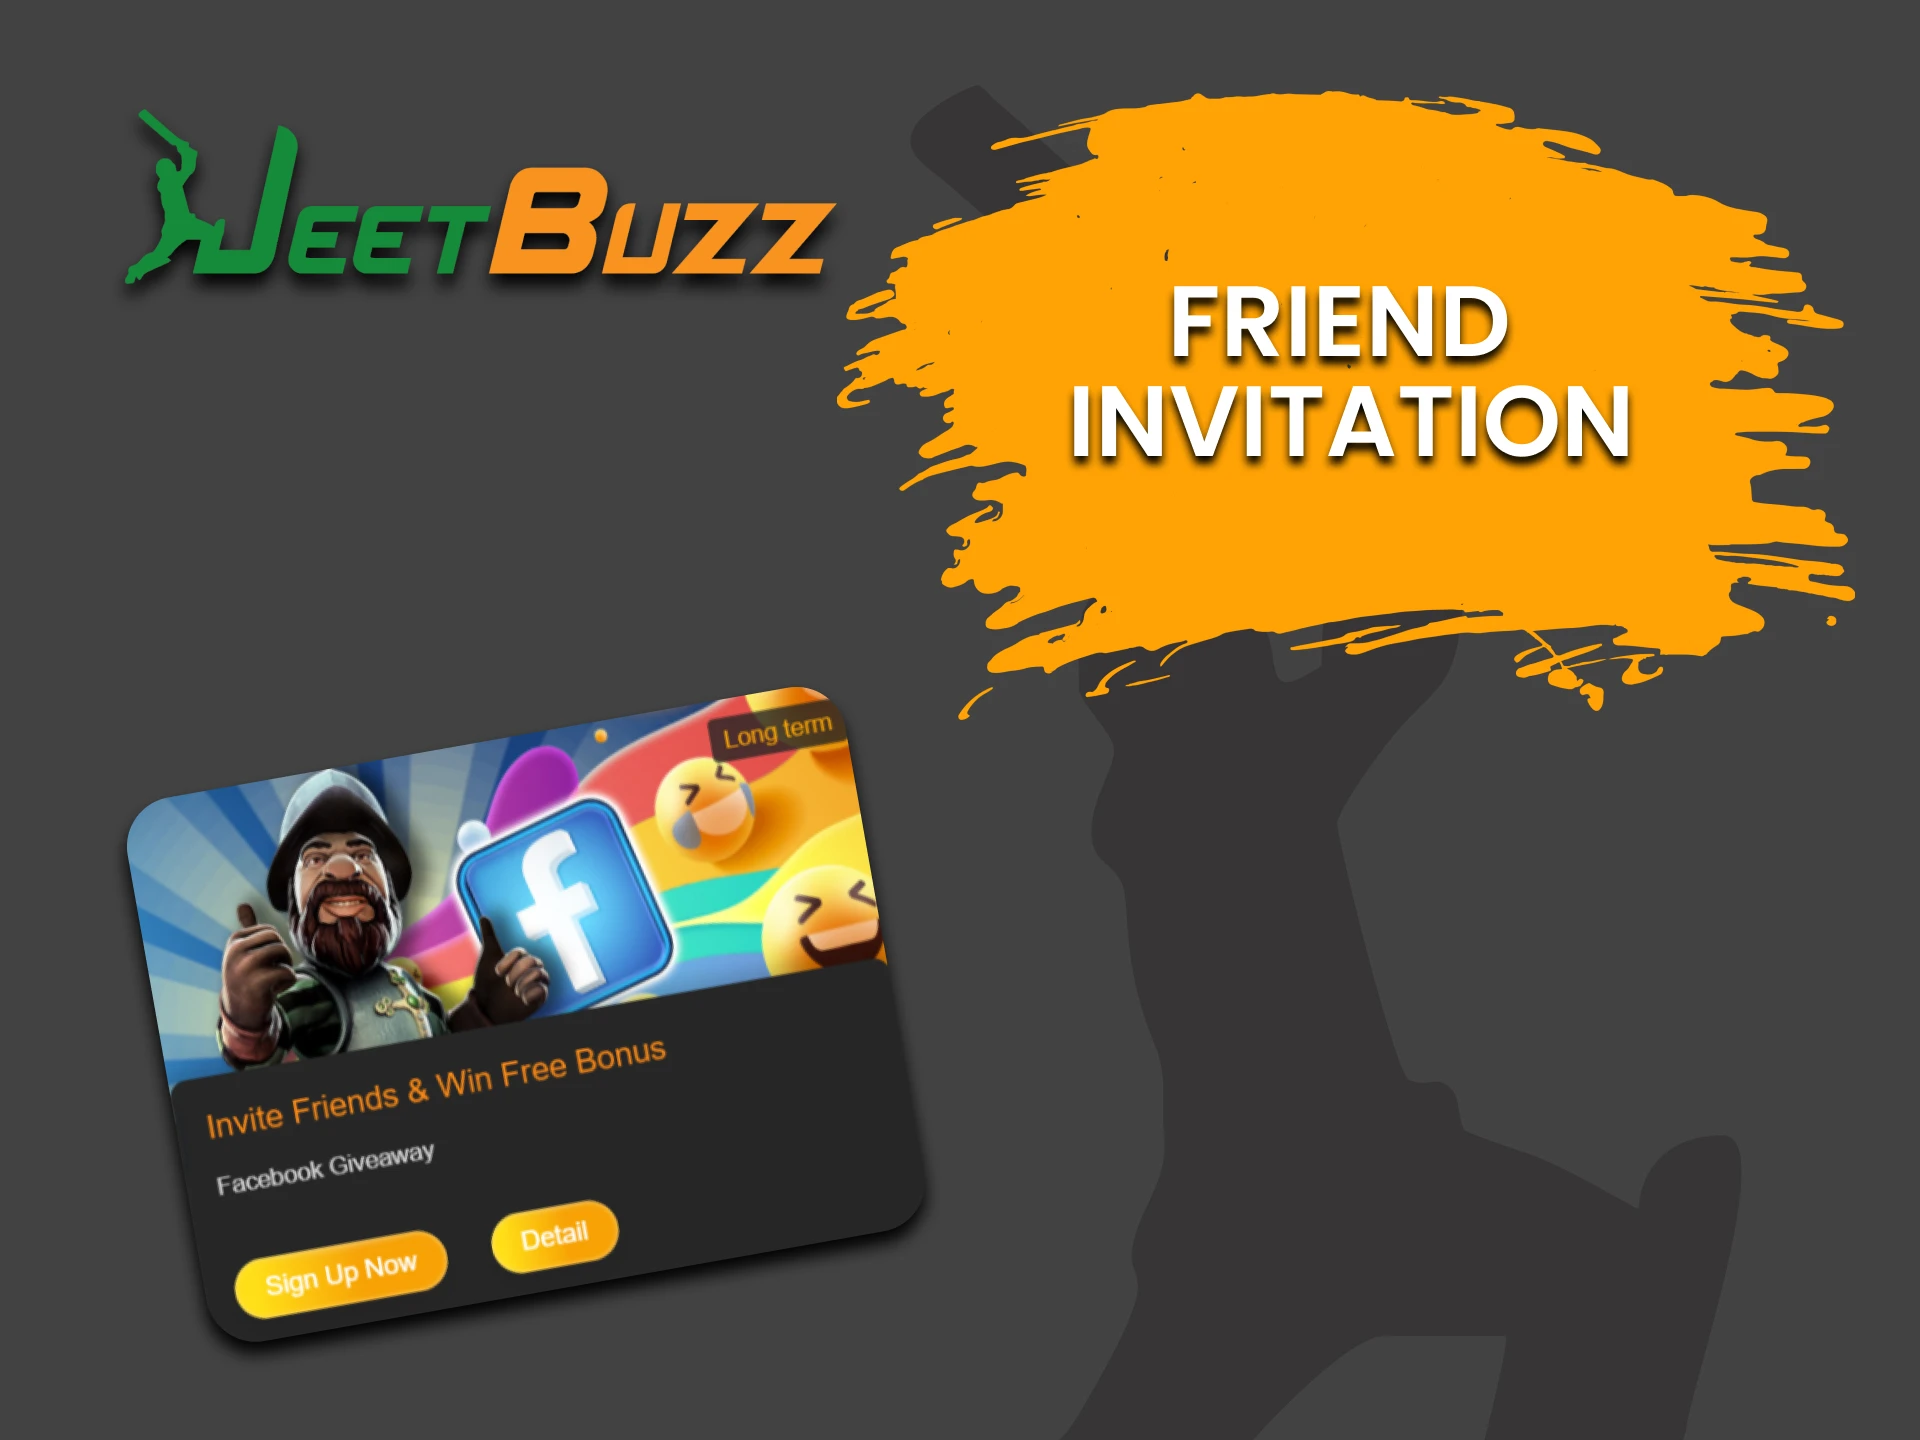 By inviting a friend to JeetBuzz you get a bonus.